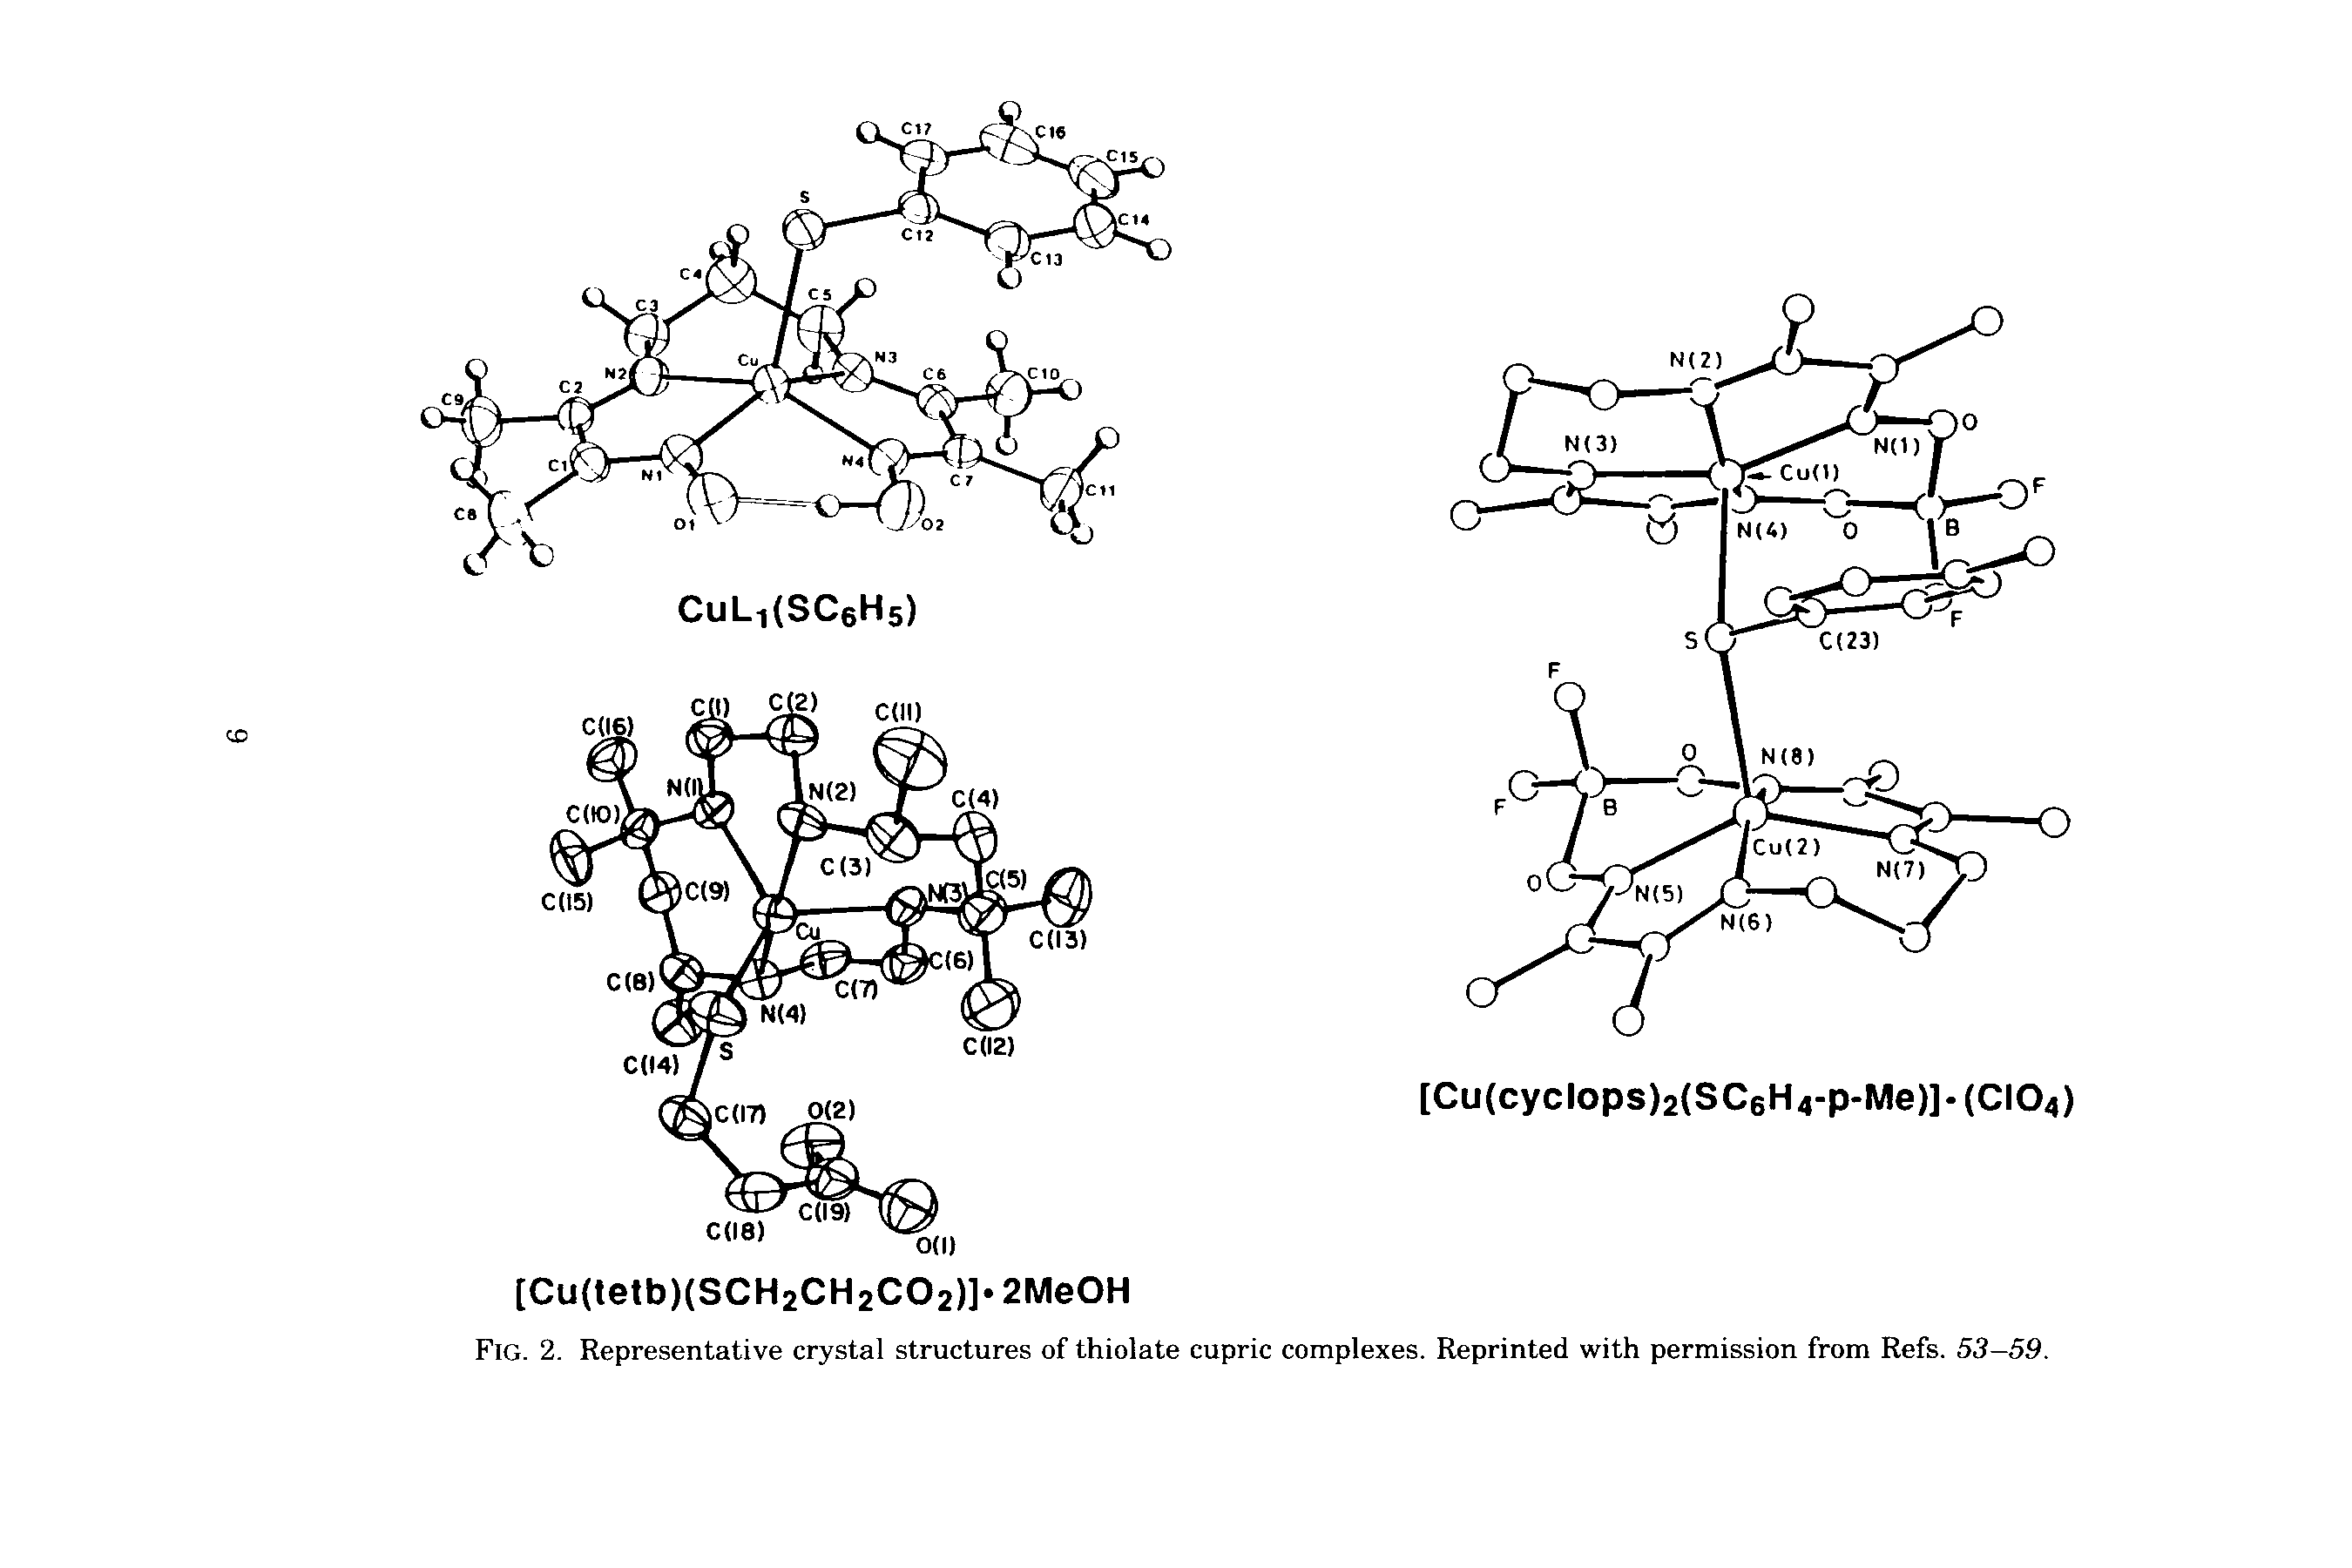 Fig. 2. Representative crystal structures of thiolate cupric complexes. Reprinted with permission from Refs. 53-59.